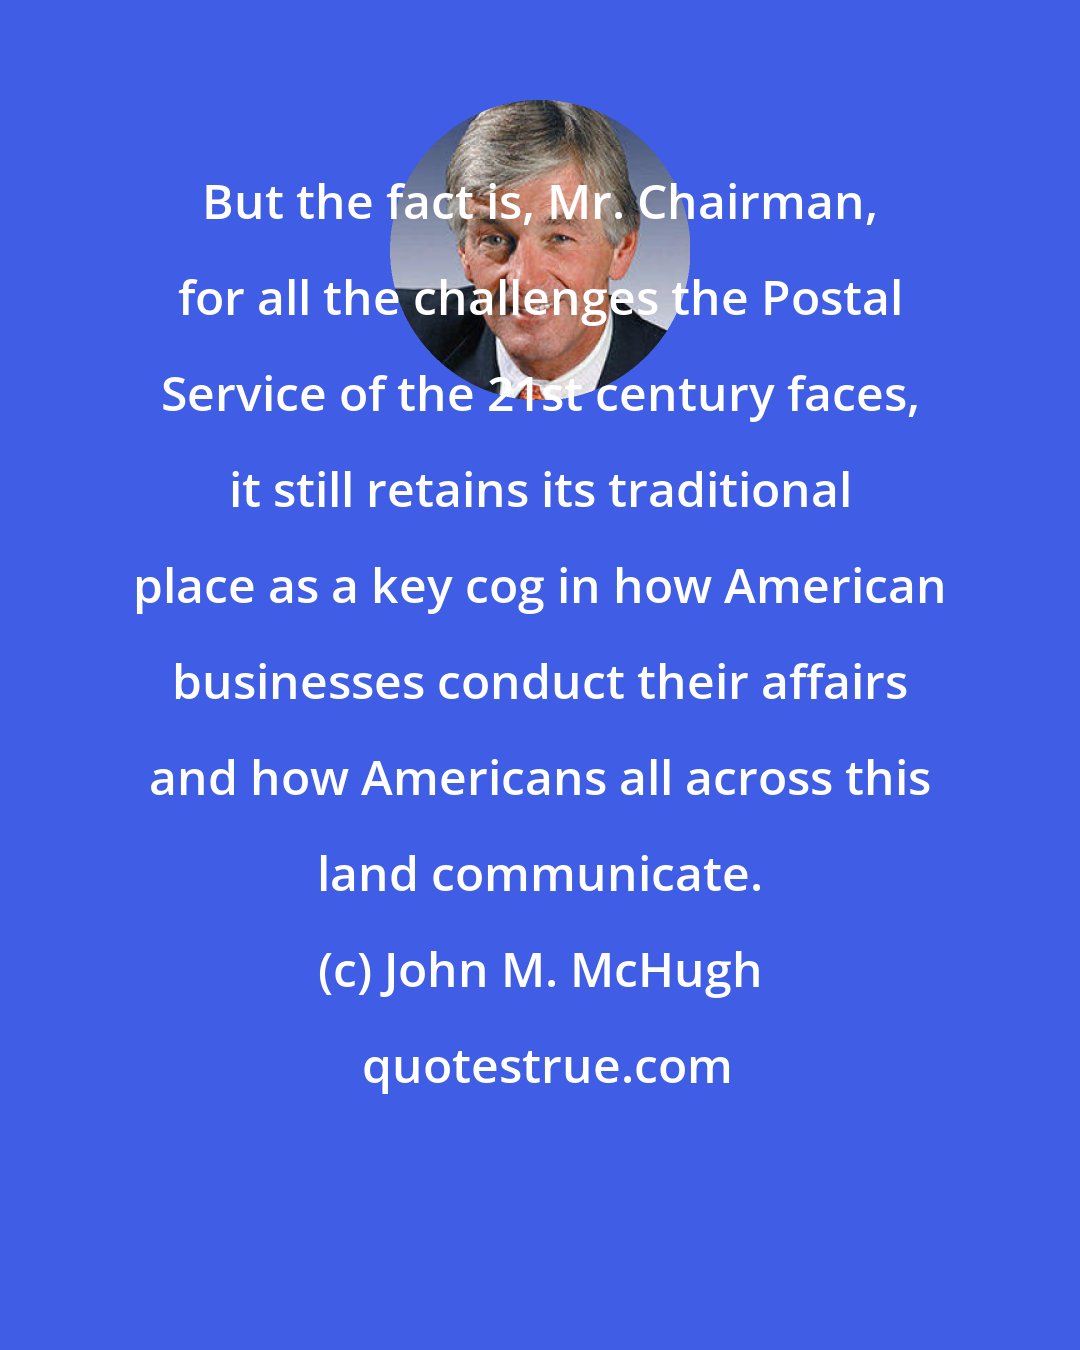 John M. McHugh: But the fact is, Mr. Chairman, for all the challenges the Postal Service of the 21st century faces, it still retains its traditional place as a key cog in how American businesses conduct their affairs and how Americans all across this land communicate.